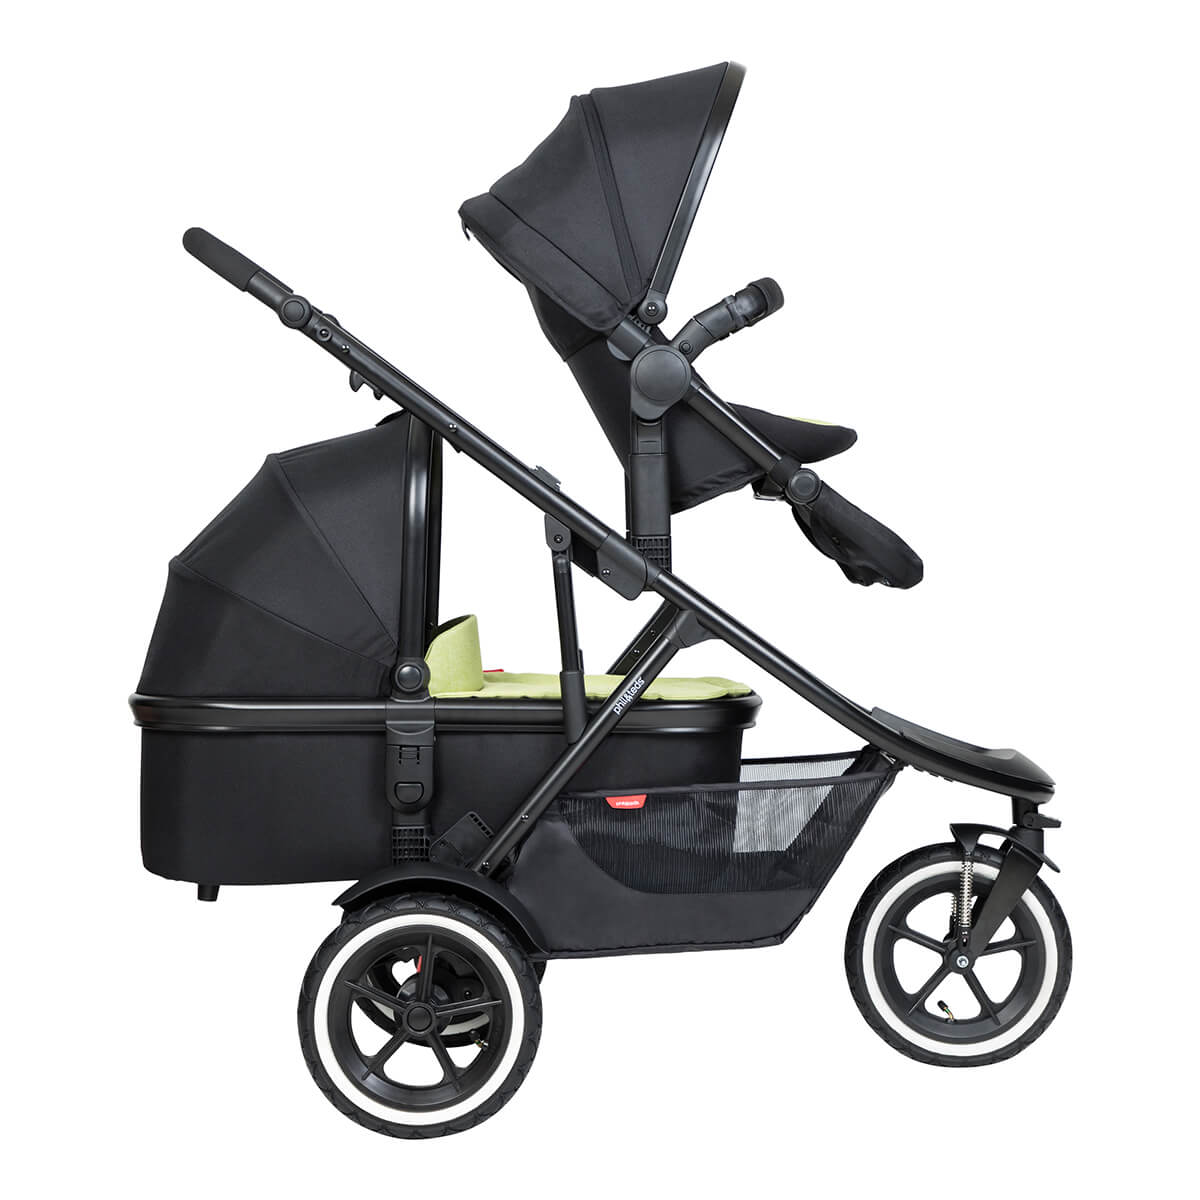 https://cdn.accentuate.io/7232374571192/19440099688632/philteds-sport-buggy-with-double-kit-extended-clip-and-snug-carrycot-side-view-v1667535089650.jpg?1200x1200